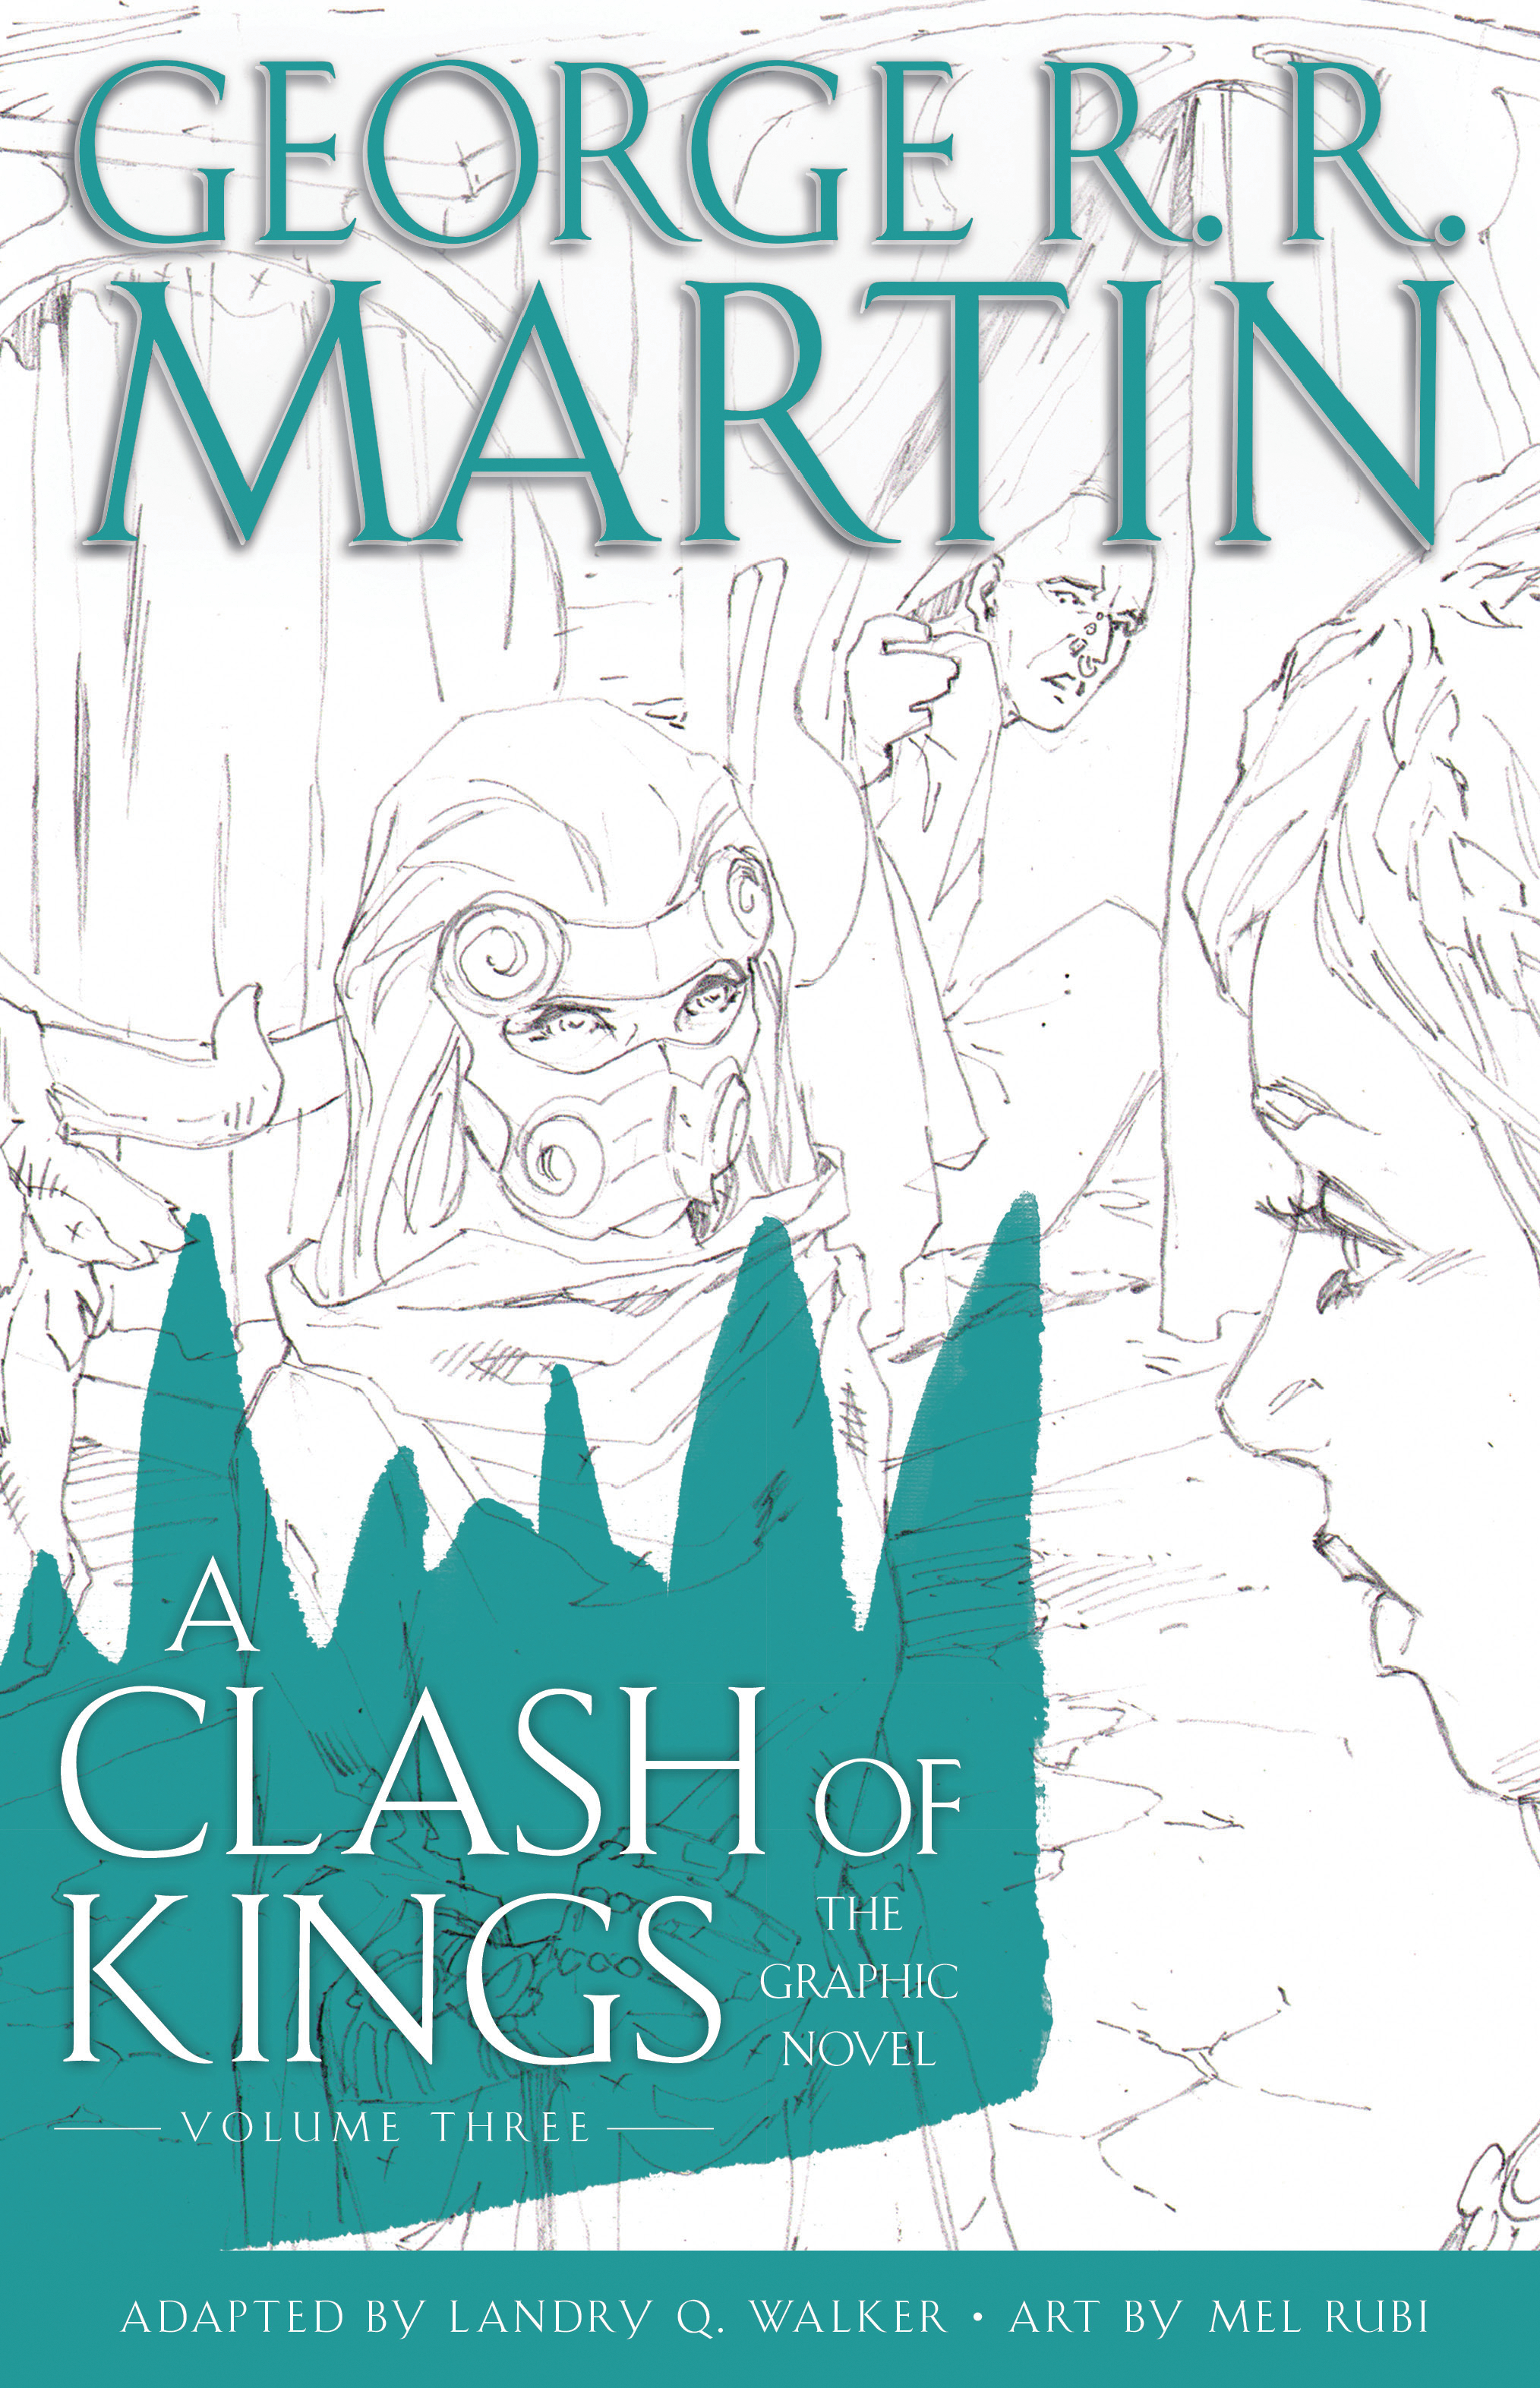 George RR Martins Clash of Kings Graphic Novel Volume 3 (Mature)